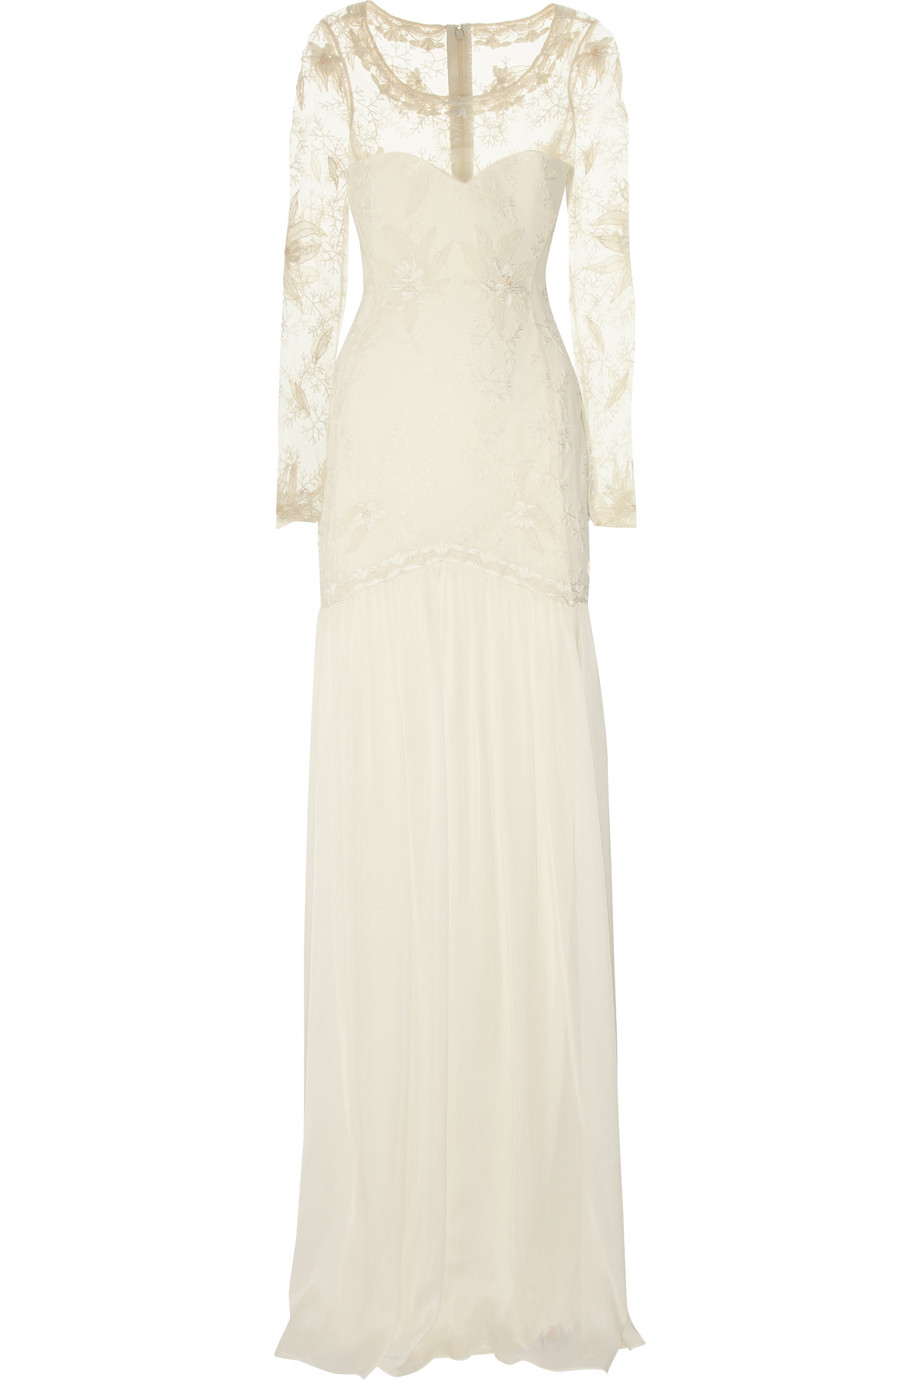 Temperley london Belle Embroidered Lace and Silk-chiffon Gown in White ...